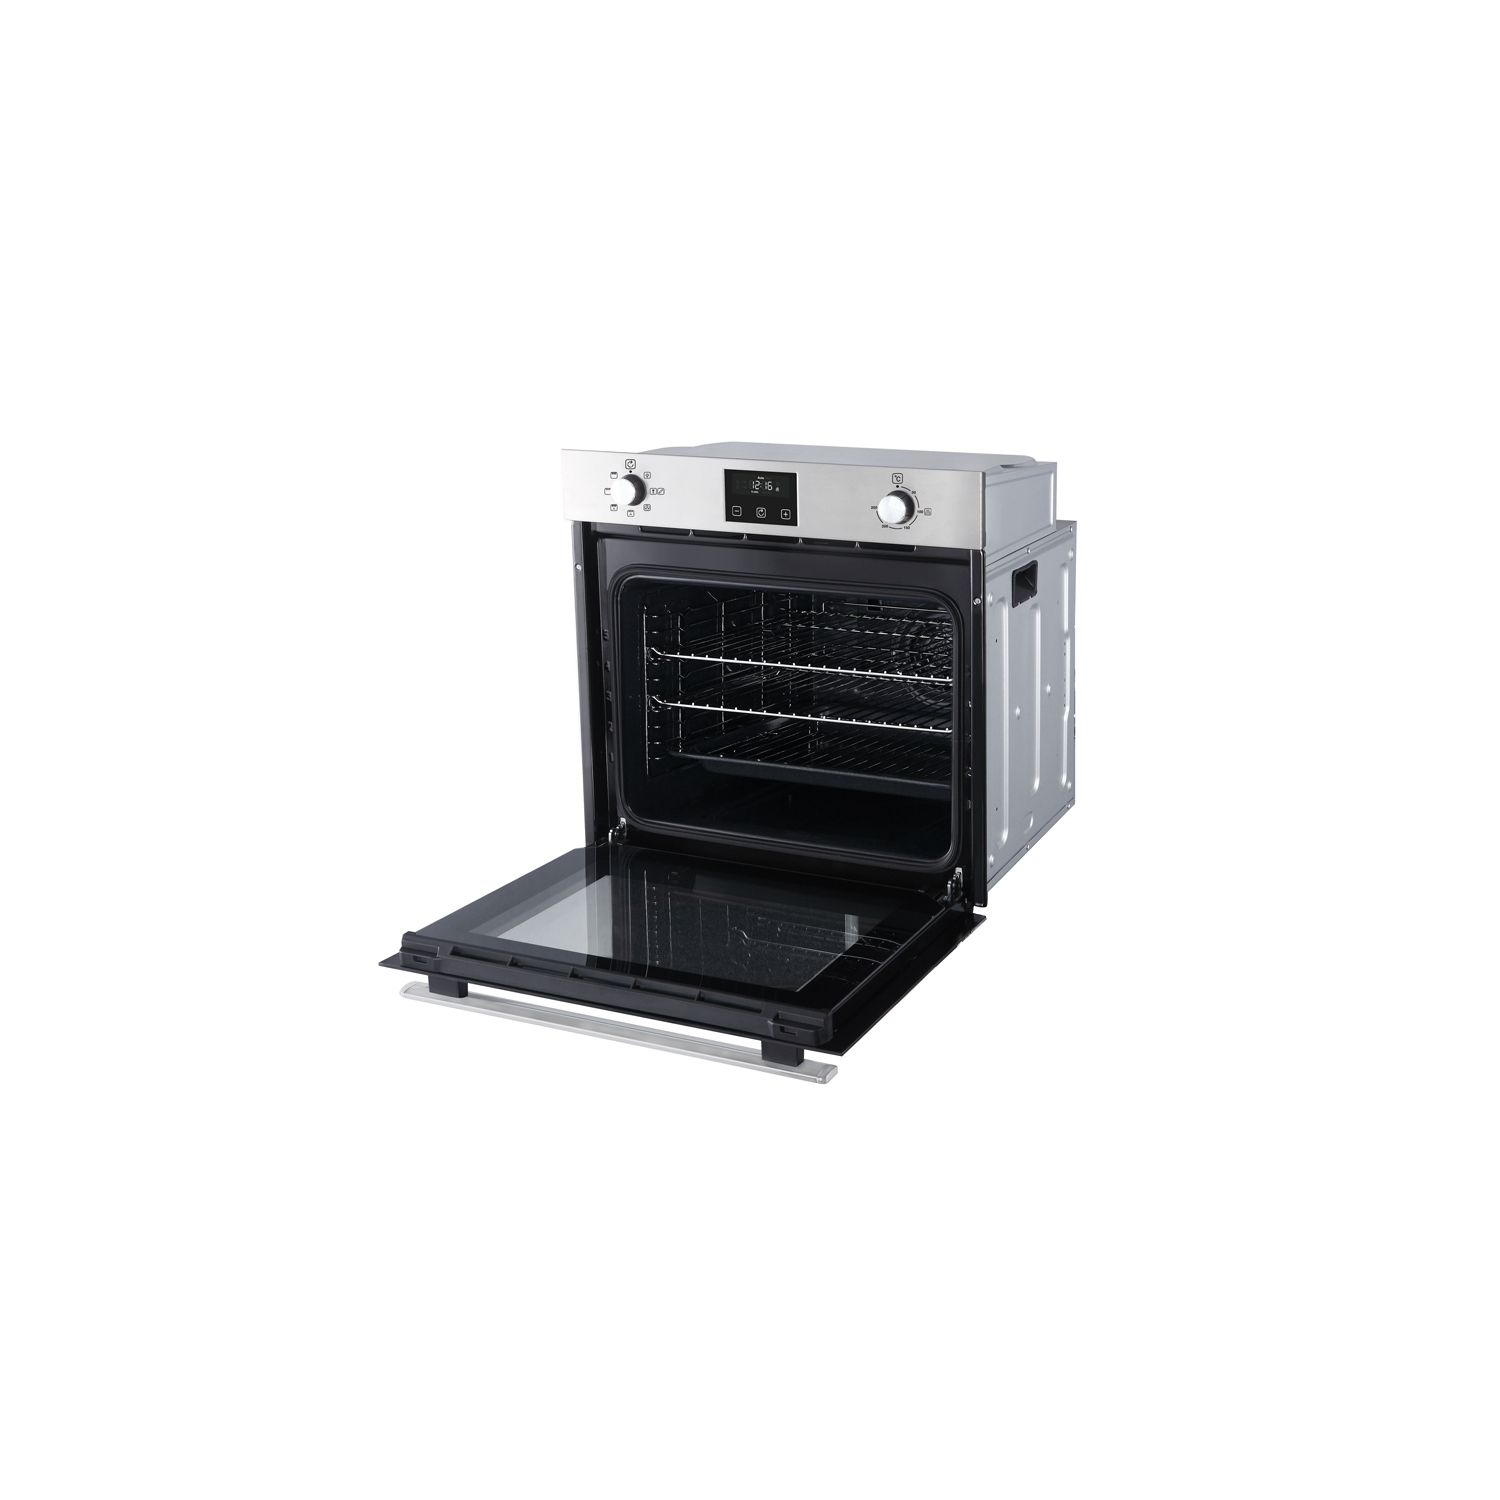 Belling 60cm Electric Oven - Stainless Steel - A Rated - 3